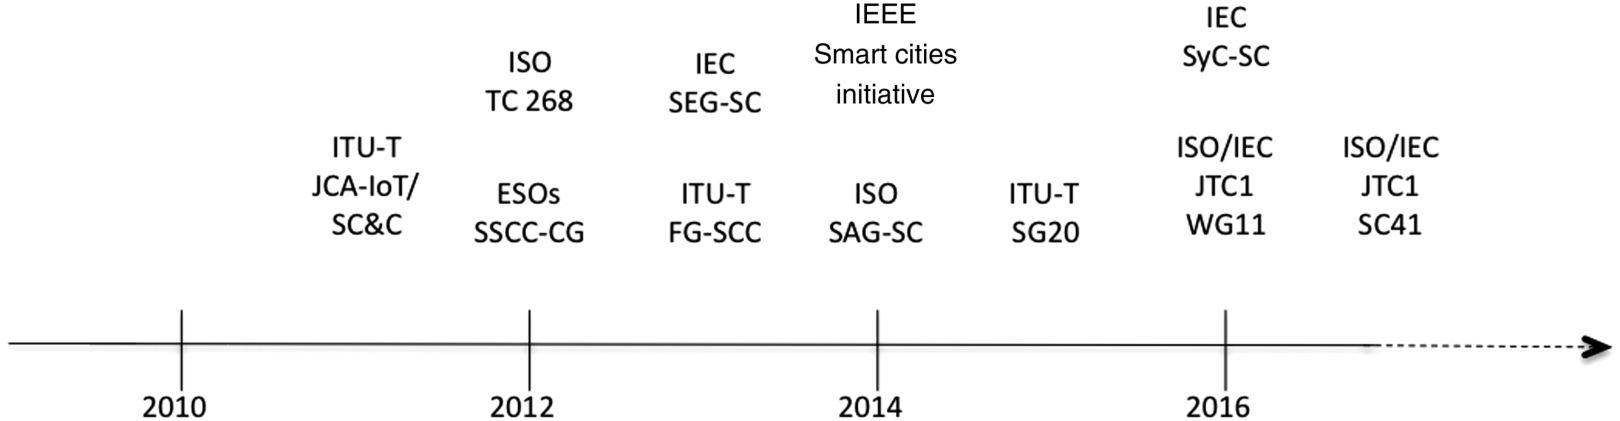 Figure depicts time line of the establishment of important standardization entities in the “smart cities” sector.